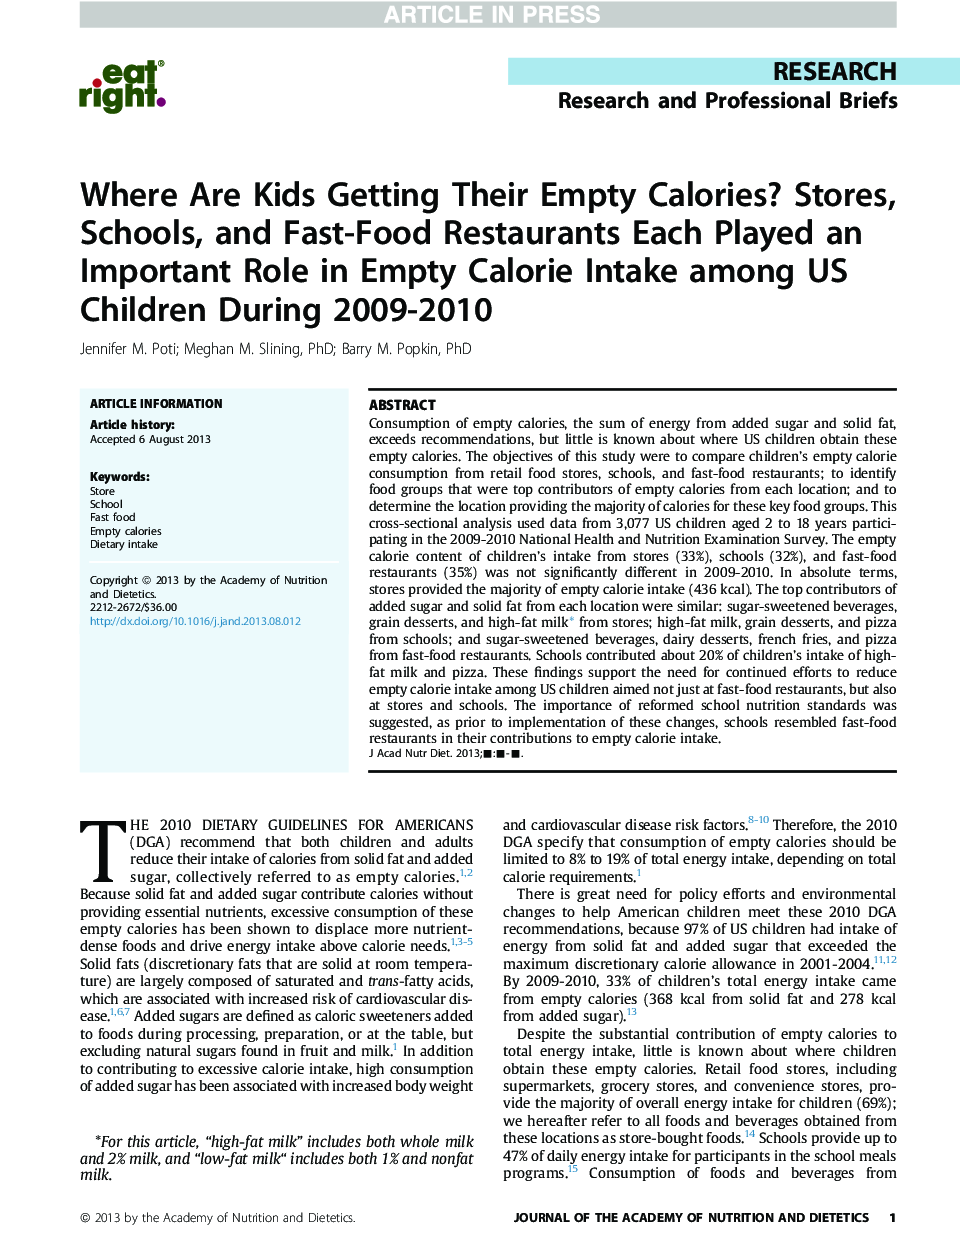 Where Are Kids Getting Their Empty Calories? Stores, Schools, and Fast-Food Restaurants Each Played an Important Role in Empty Calorie Intake among US Children During 2009-2010